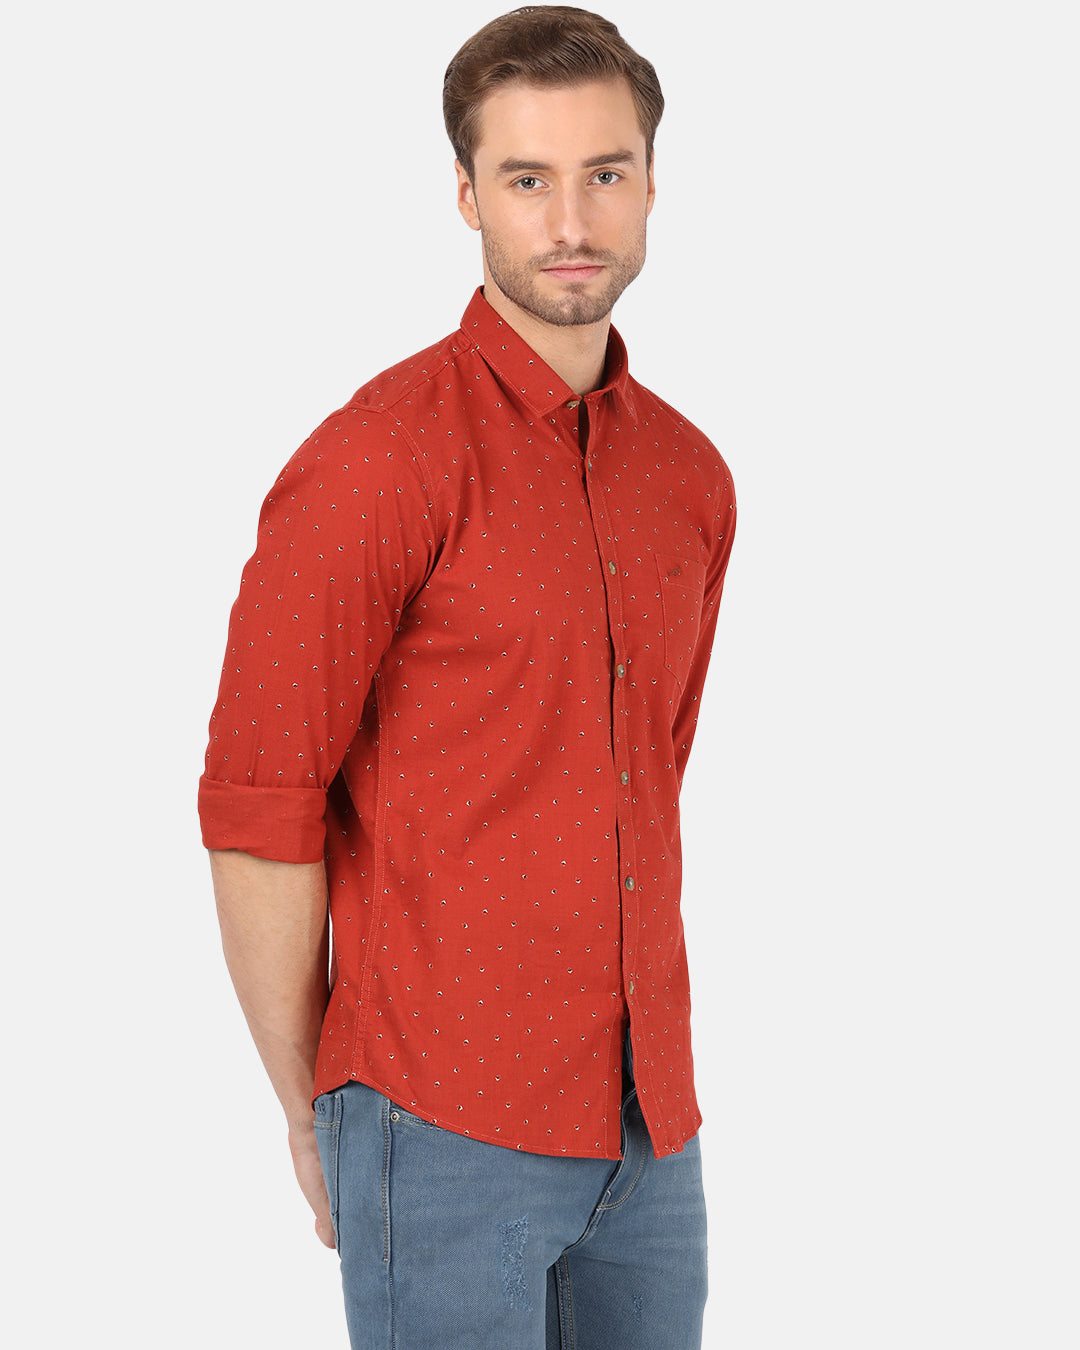 Crocodile Casual Full Sleeve Slim Fit Printed Brick Red with Collar Shirt for Men